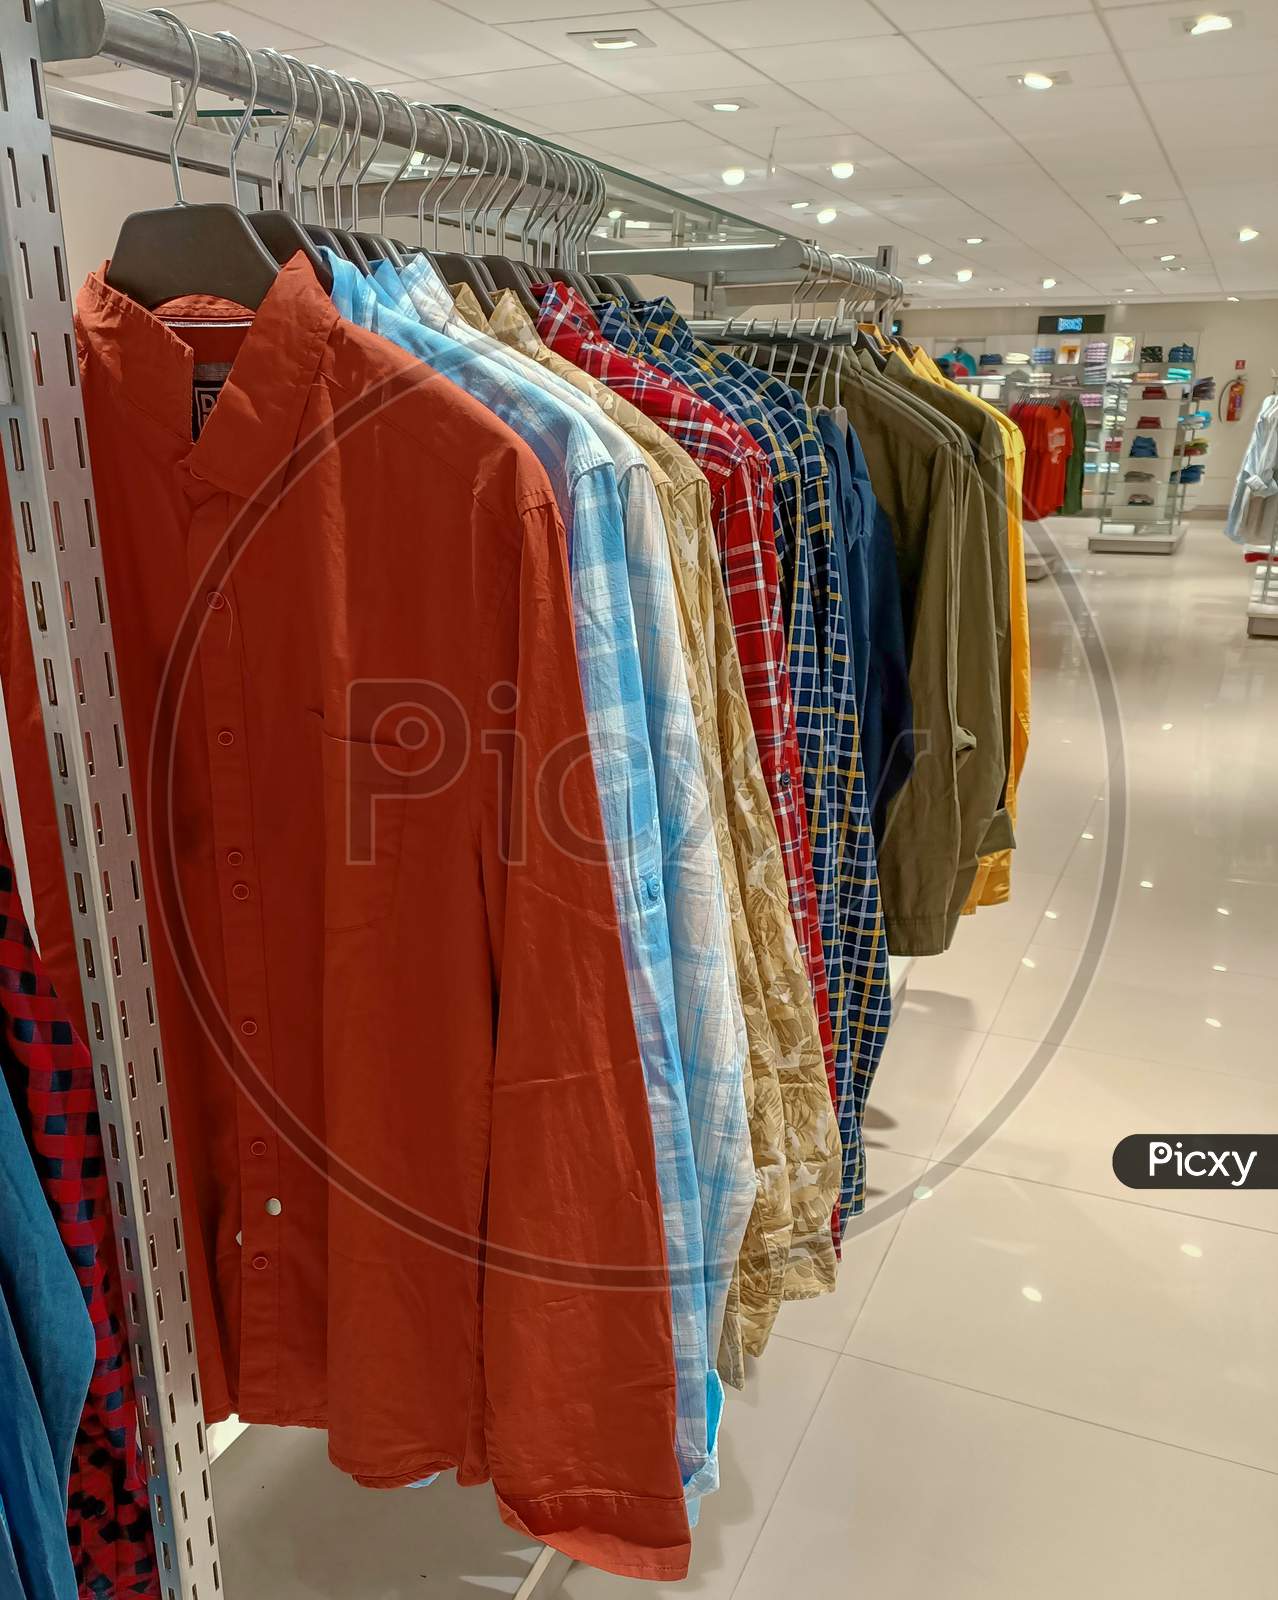 A Trendy collection of traditional Indian Kurtas for Men in different colors and designs displayed at a Fashion store in Mysuru of Karnataka state in India.